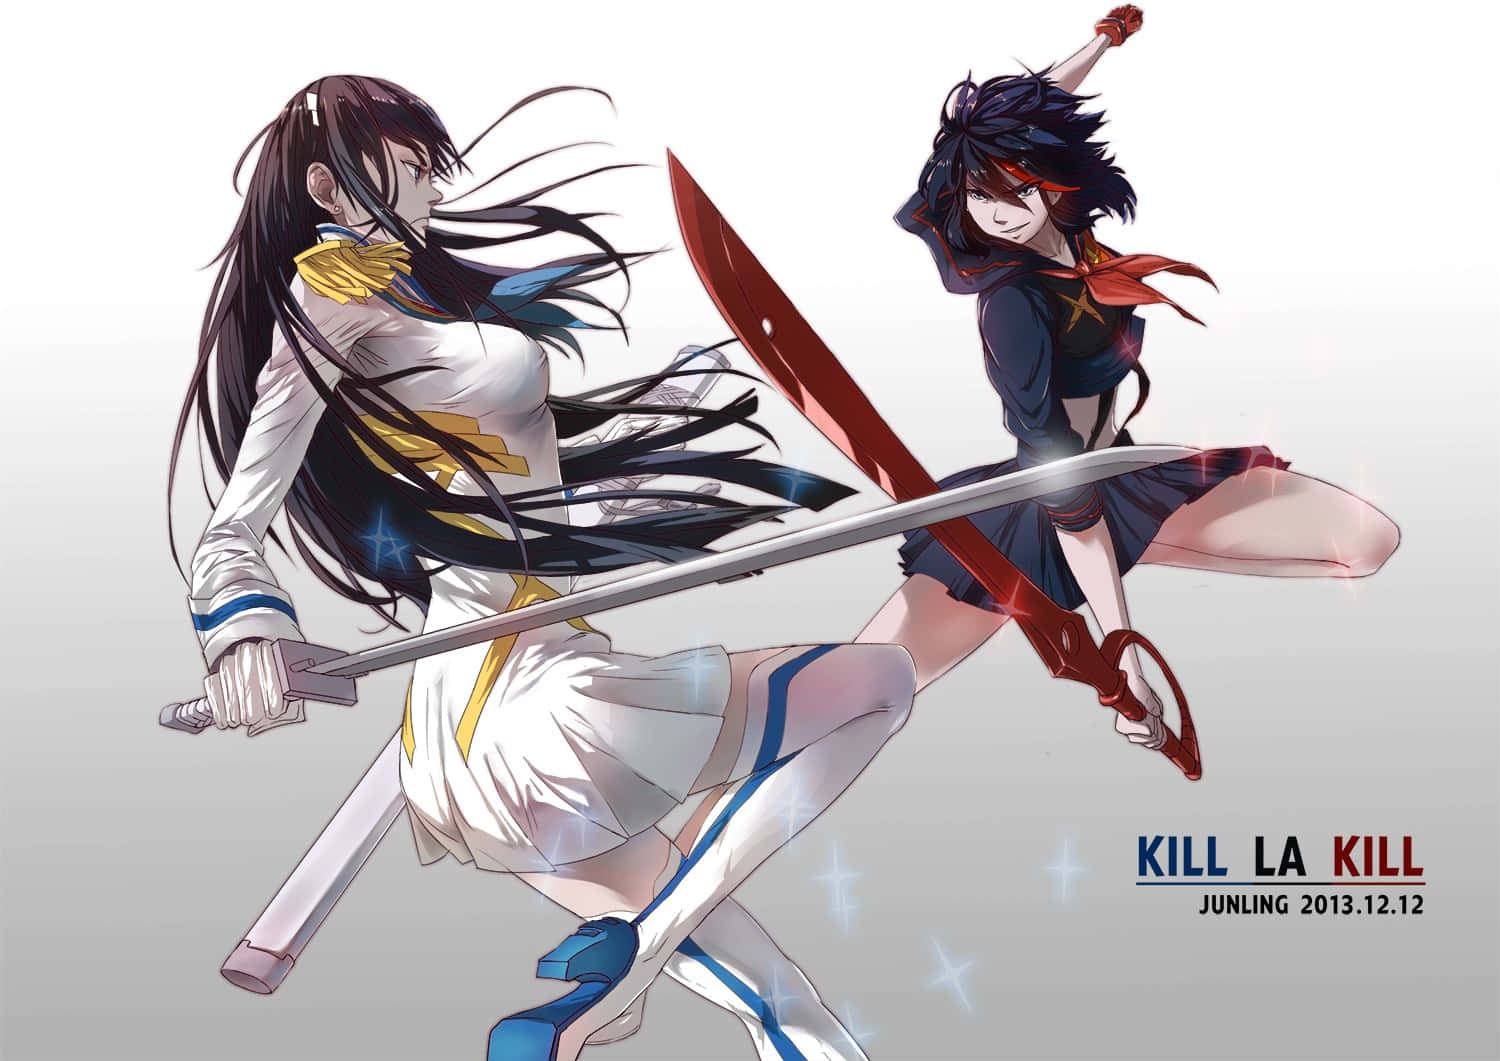 “All that stand in my way, answer to me!” – Satsuki Kiryuin Wallpaper